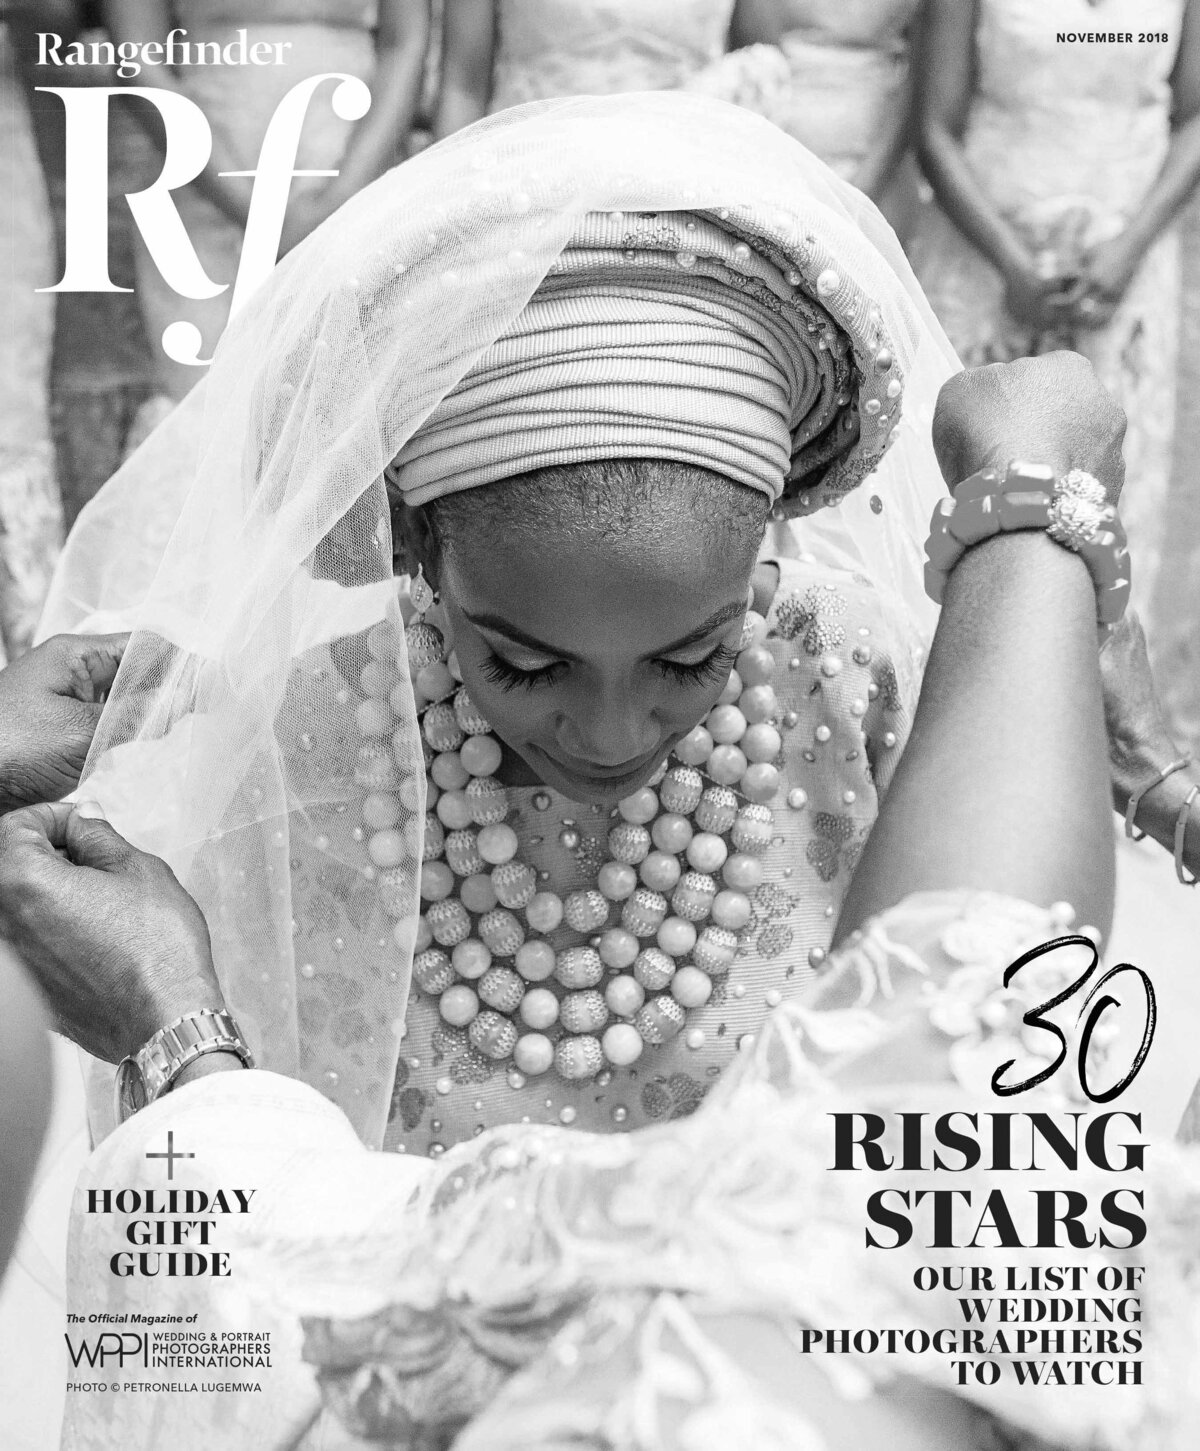 Flora and Grace named Rangefinder 30 Rising Star of Wedding Photography in the World